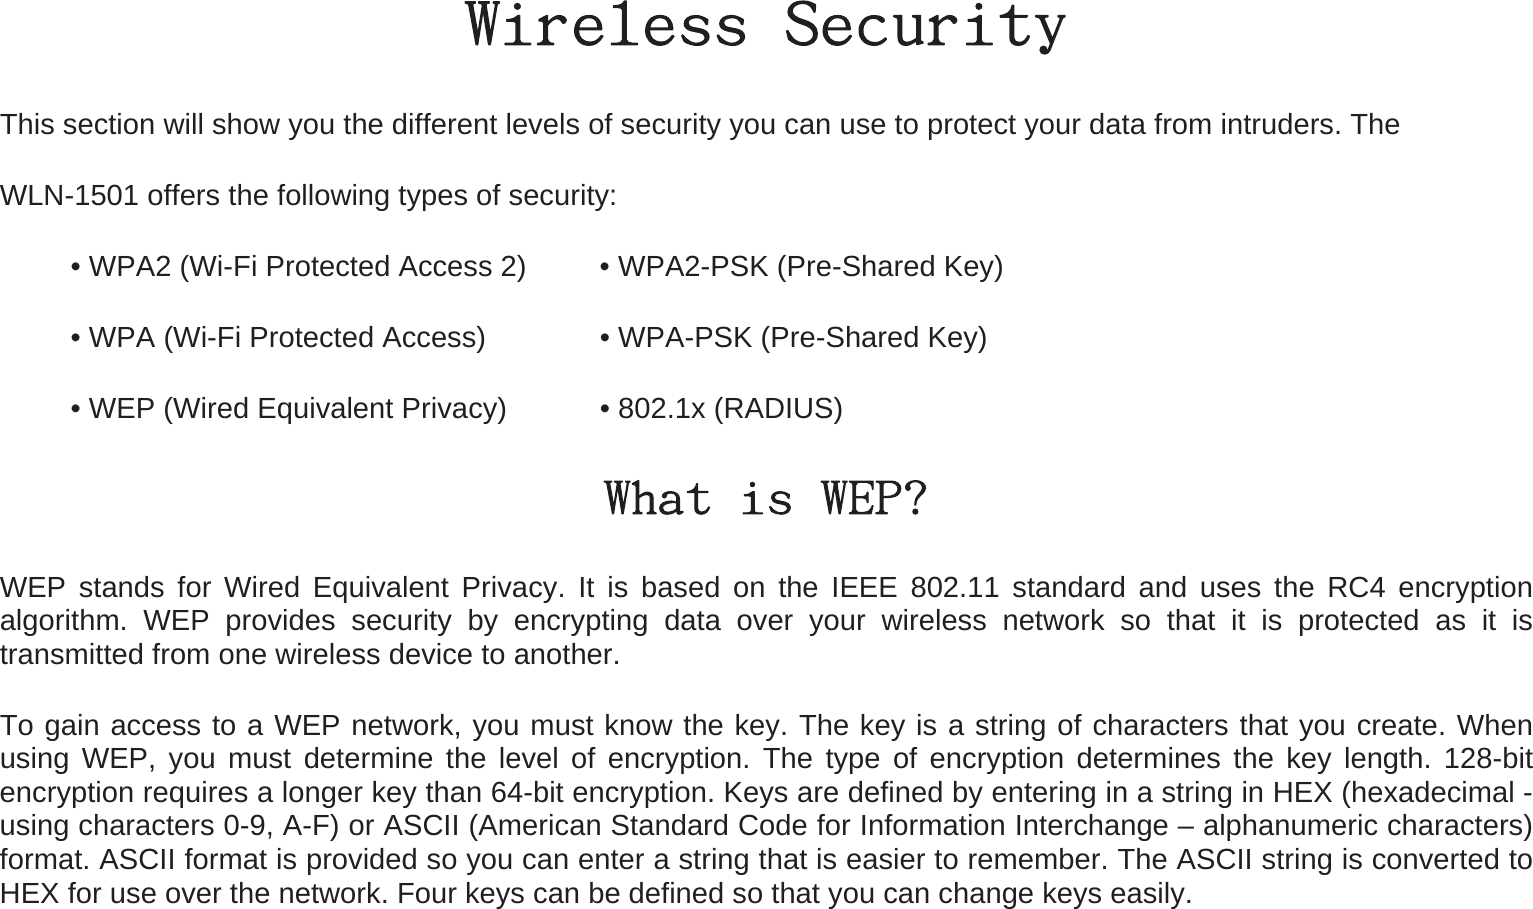 Wireless Security This section will show you the different levels of security you can use to protect your data from intruders. The   WLN-1501 offers the following types of security: • WPA2 (Wi-Fi Protected Access 2)     • WPA2-PSK (Pre-Shared Key) • WPA (Wi-Fi Protected Access)        • WPA-PSK (Pre-Shared Key) • WEP (Wired Equivalent Privacy)     • 802.1x (RADIUS) What is WEP? WEP stands for Wired Equivalent Privacy. It is based on the IEEE 802.11 standard and uses the RC4 encryption algorithm. WEP provides security by encrypting data over your wireless network so that it is protected as it is transmitted from one wireless device to another. To gain access to a WEP network, you must know the key. The key is a string of characters that you create. When using WEP, you must determine the level of encryption. The type of encryption determines the key length. 128-bit encryption requires a longer key than 64-bit encryption. Keys are defined by entering in a string in HEX (hexadecimal - using characters 0-9, A-F) or ASCII (American Standard Code for Information Interchange – alphanumeric characters) format. ASCII format is provided so you can enter a string that is easier to remember. The ASCII string is converted to HEX for use over the network. Four keys can be defined so that you can change keys easily. 